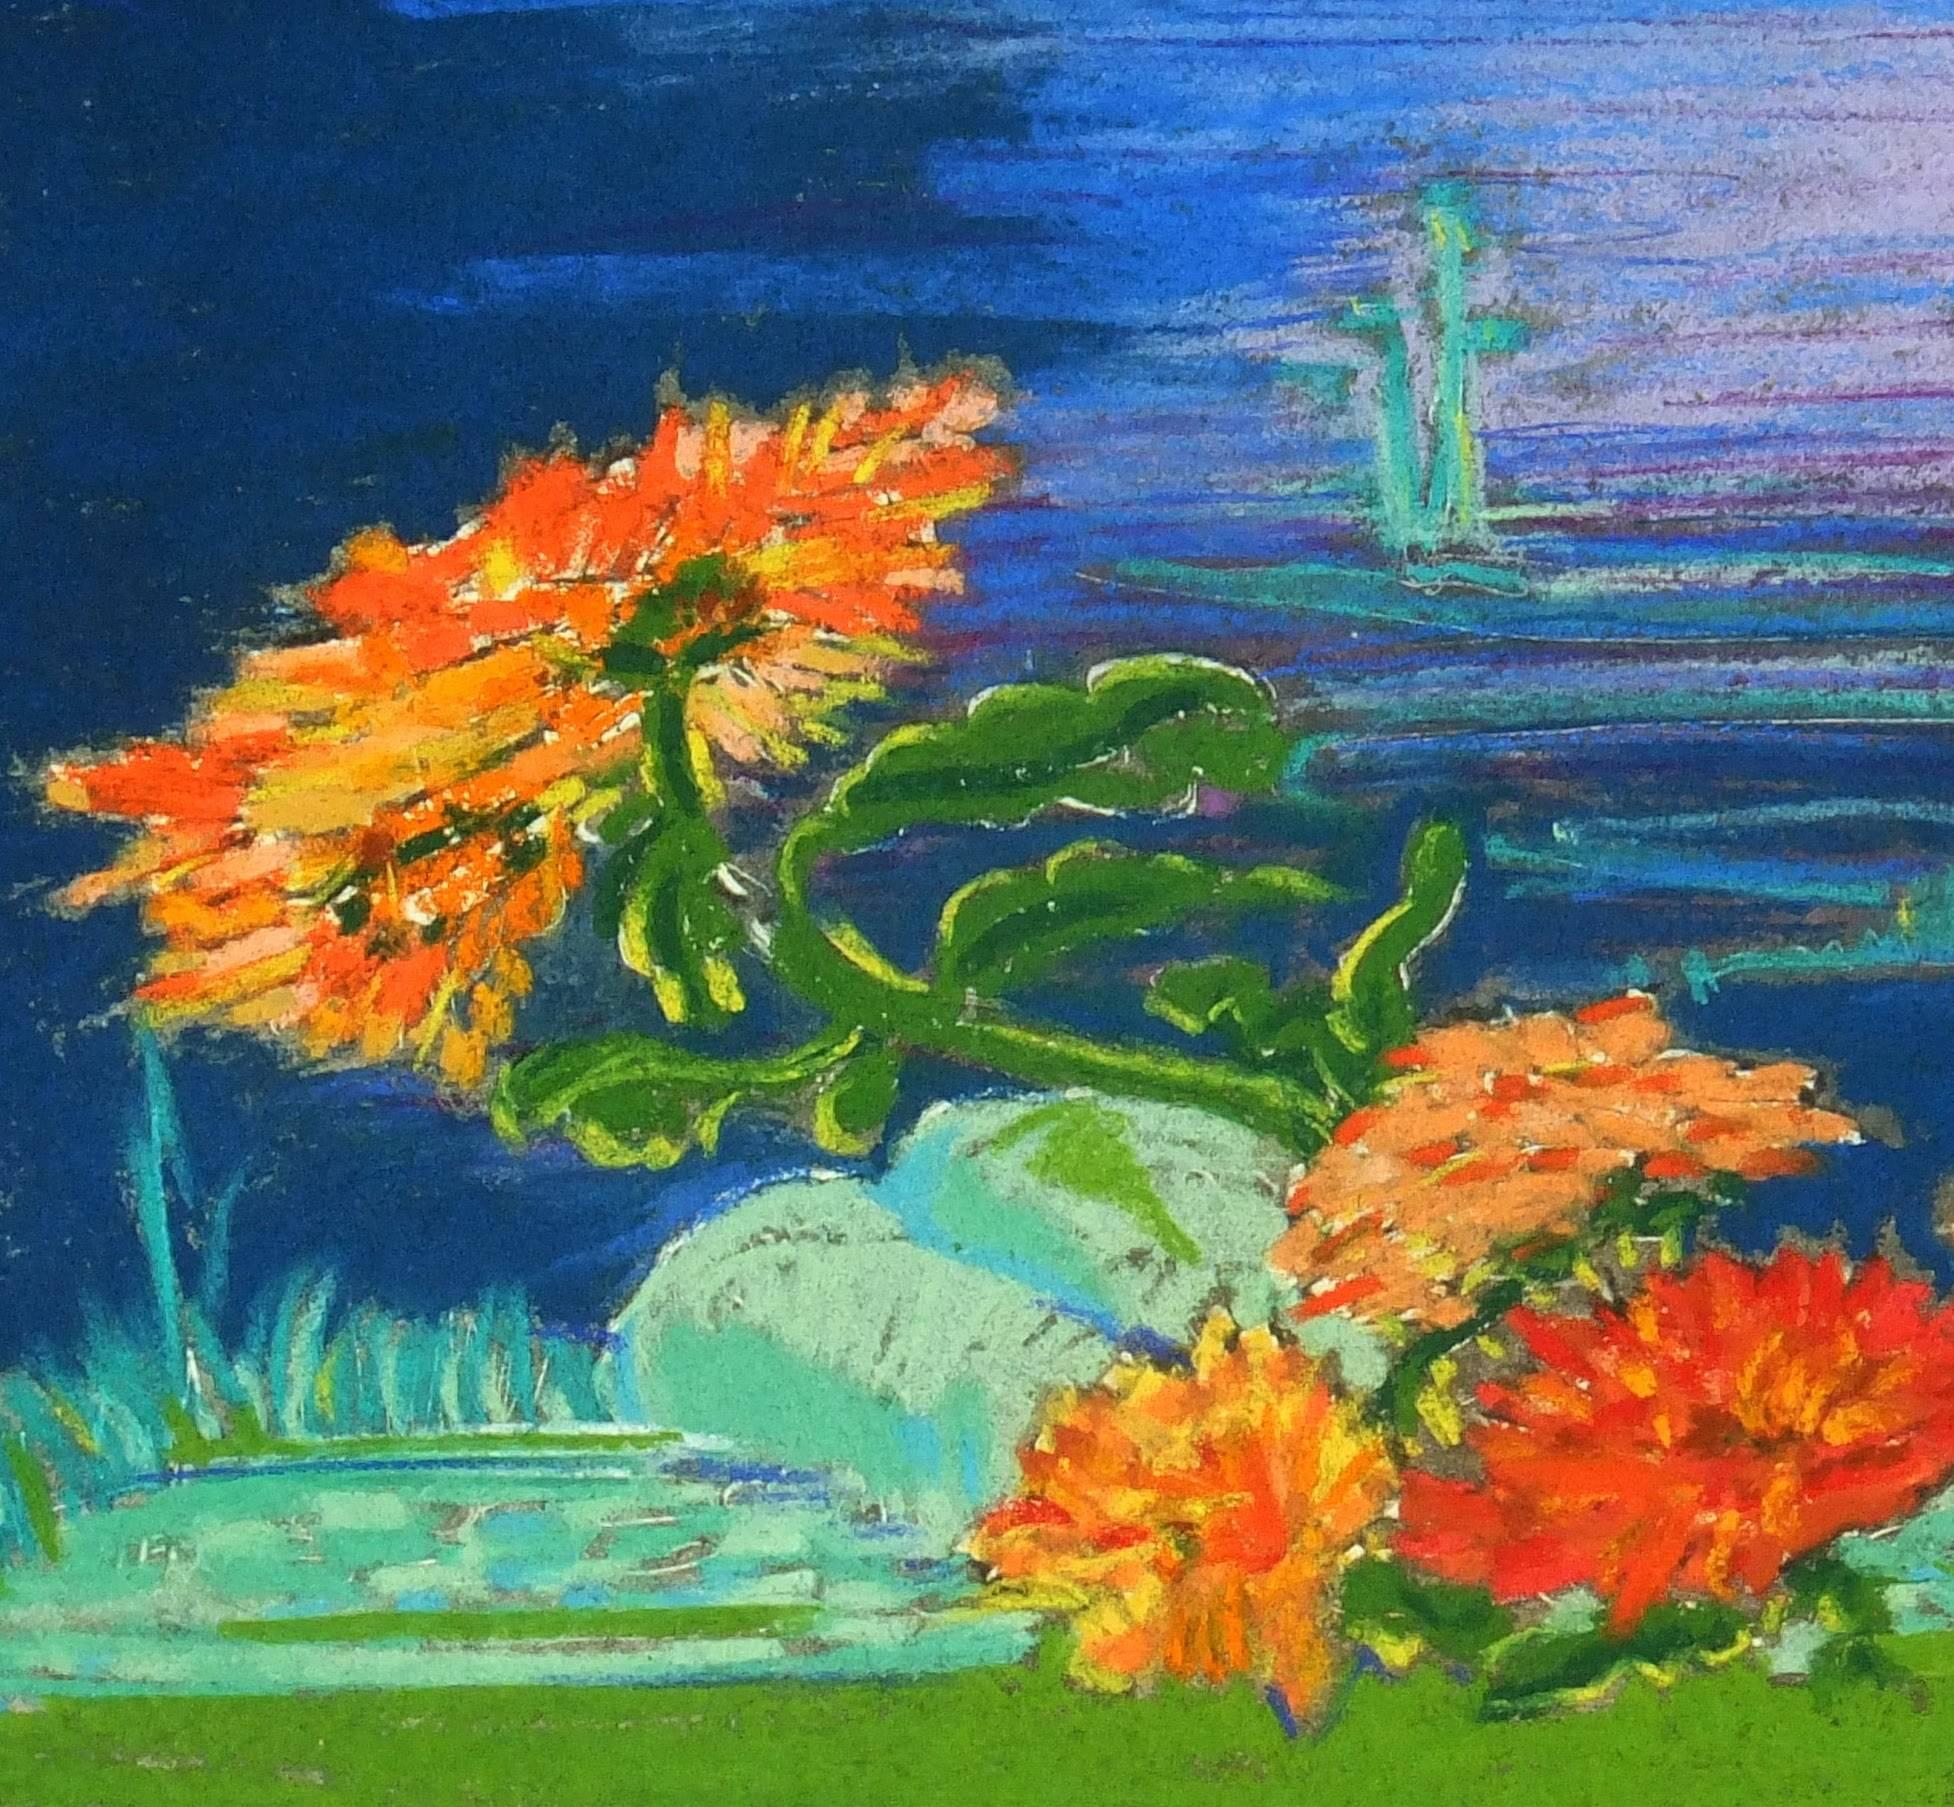 Vibrant Colored Pastel with Blue Background- Waterside Bloom  - Art by June Ziegler